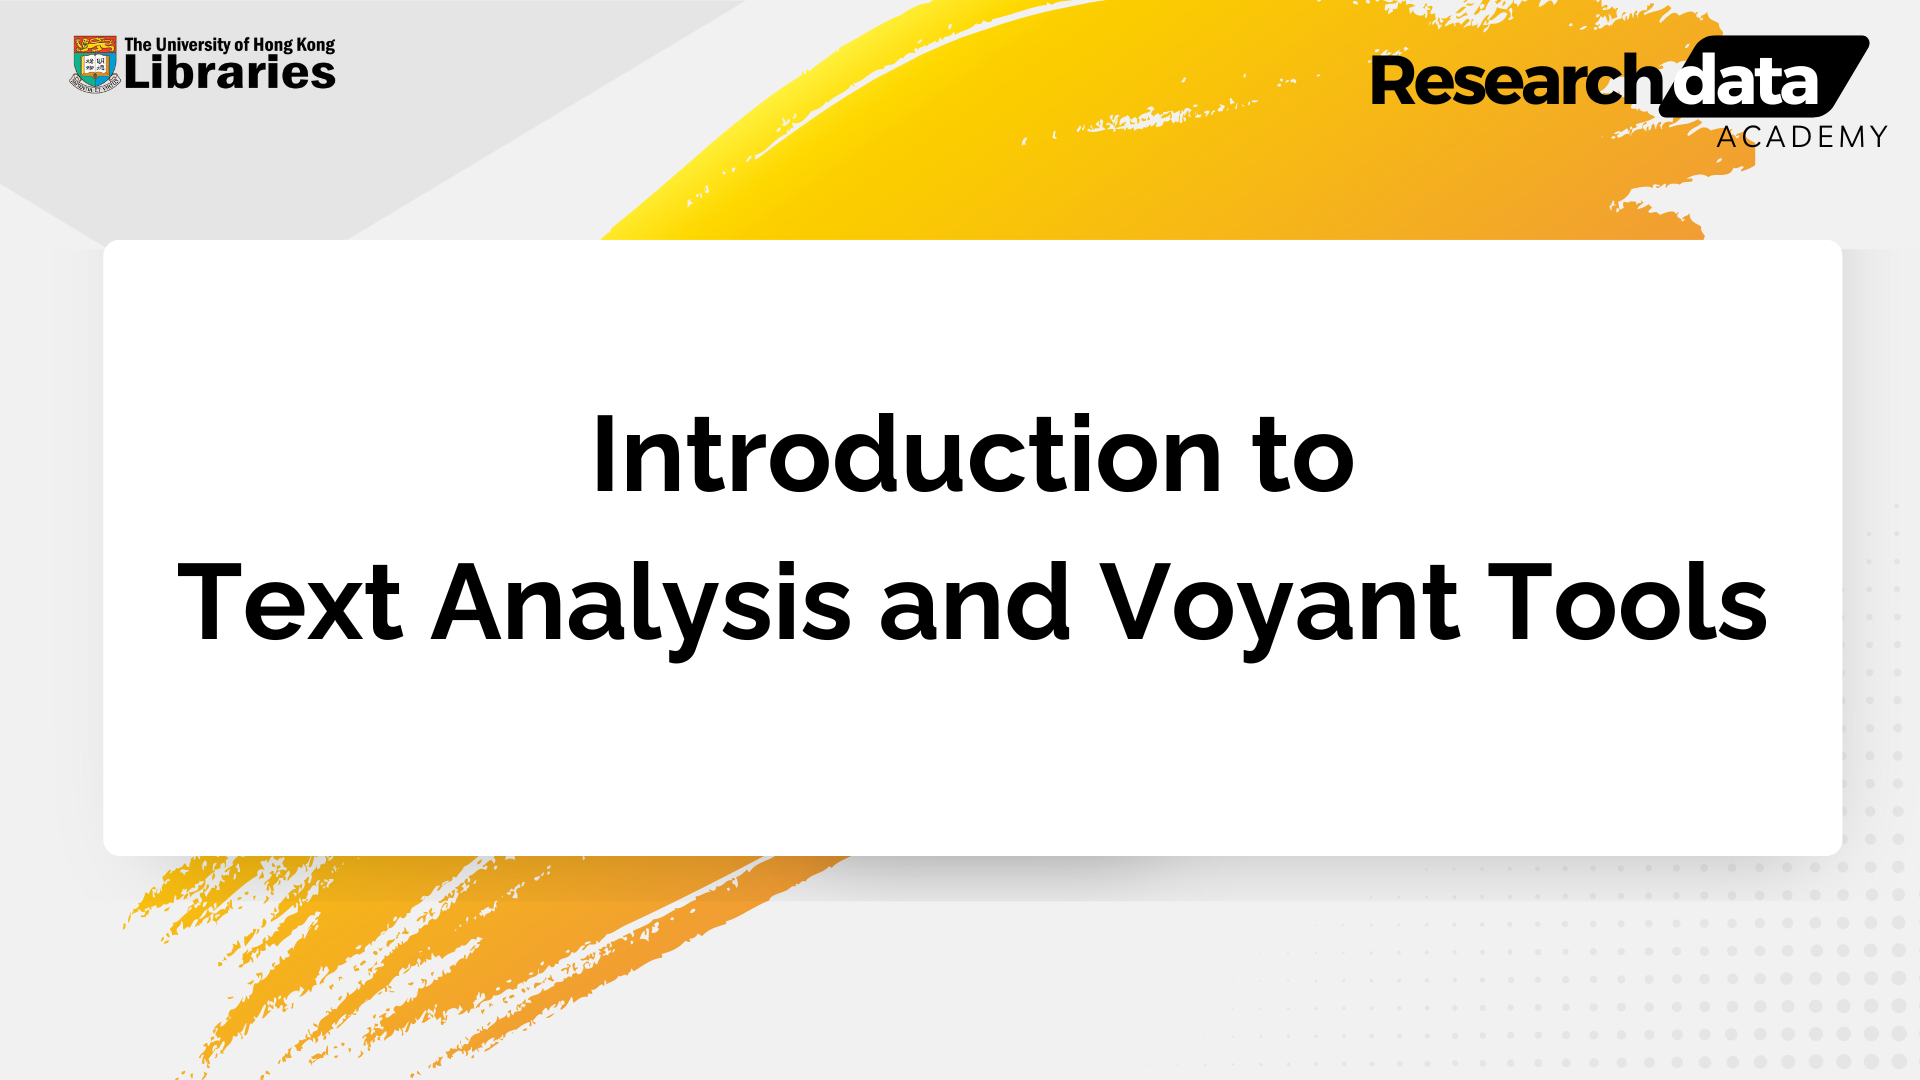 Introduction to Text Analysis and Voyant Tools